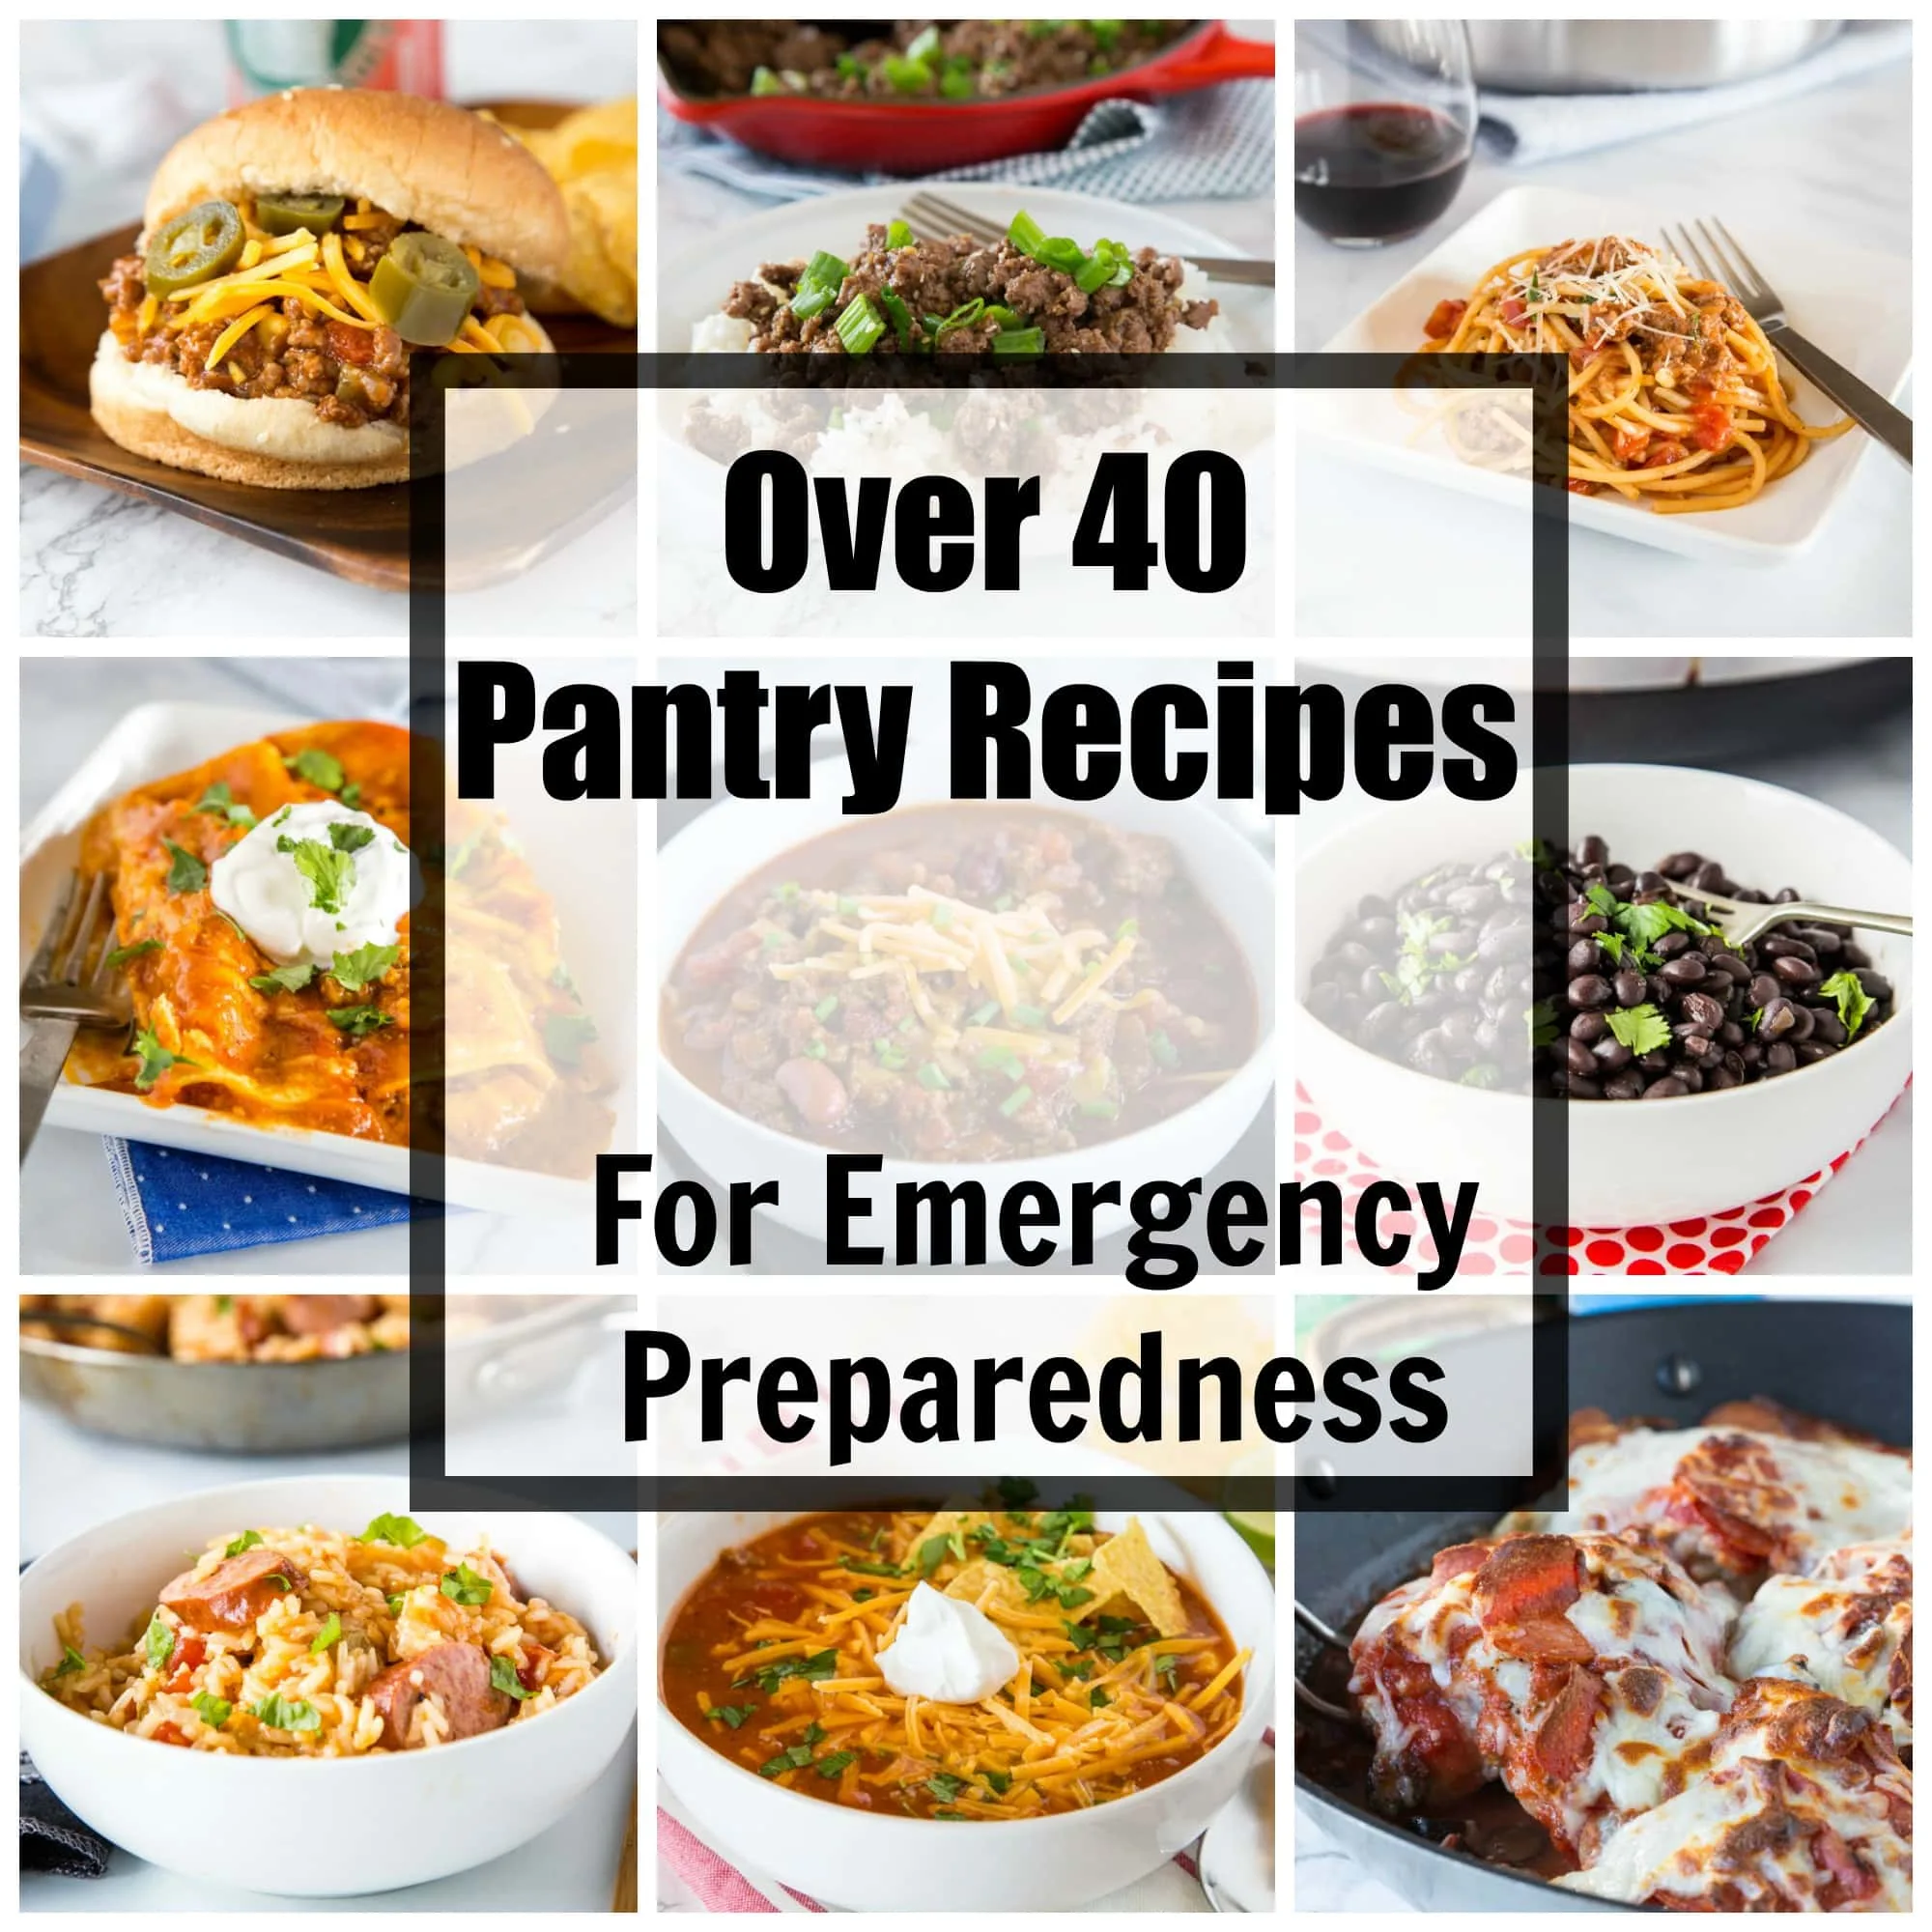 Pantry Recipes - whether you are trying to use up what you have in your kitchen or prepping for an emergency here are 40 pantry recipes to get you through!  